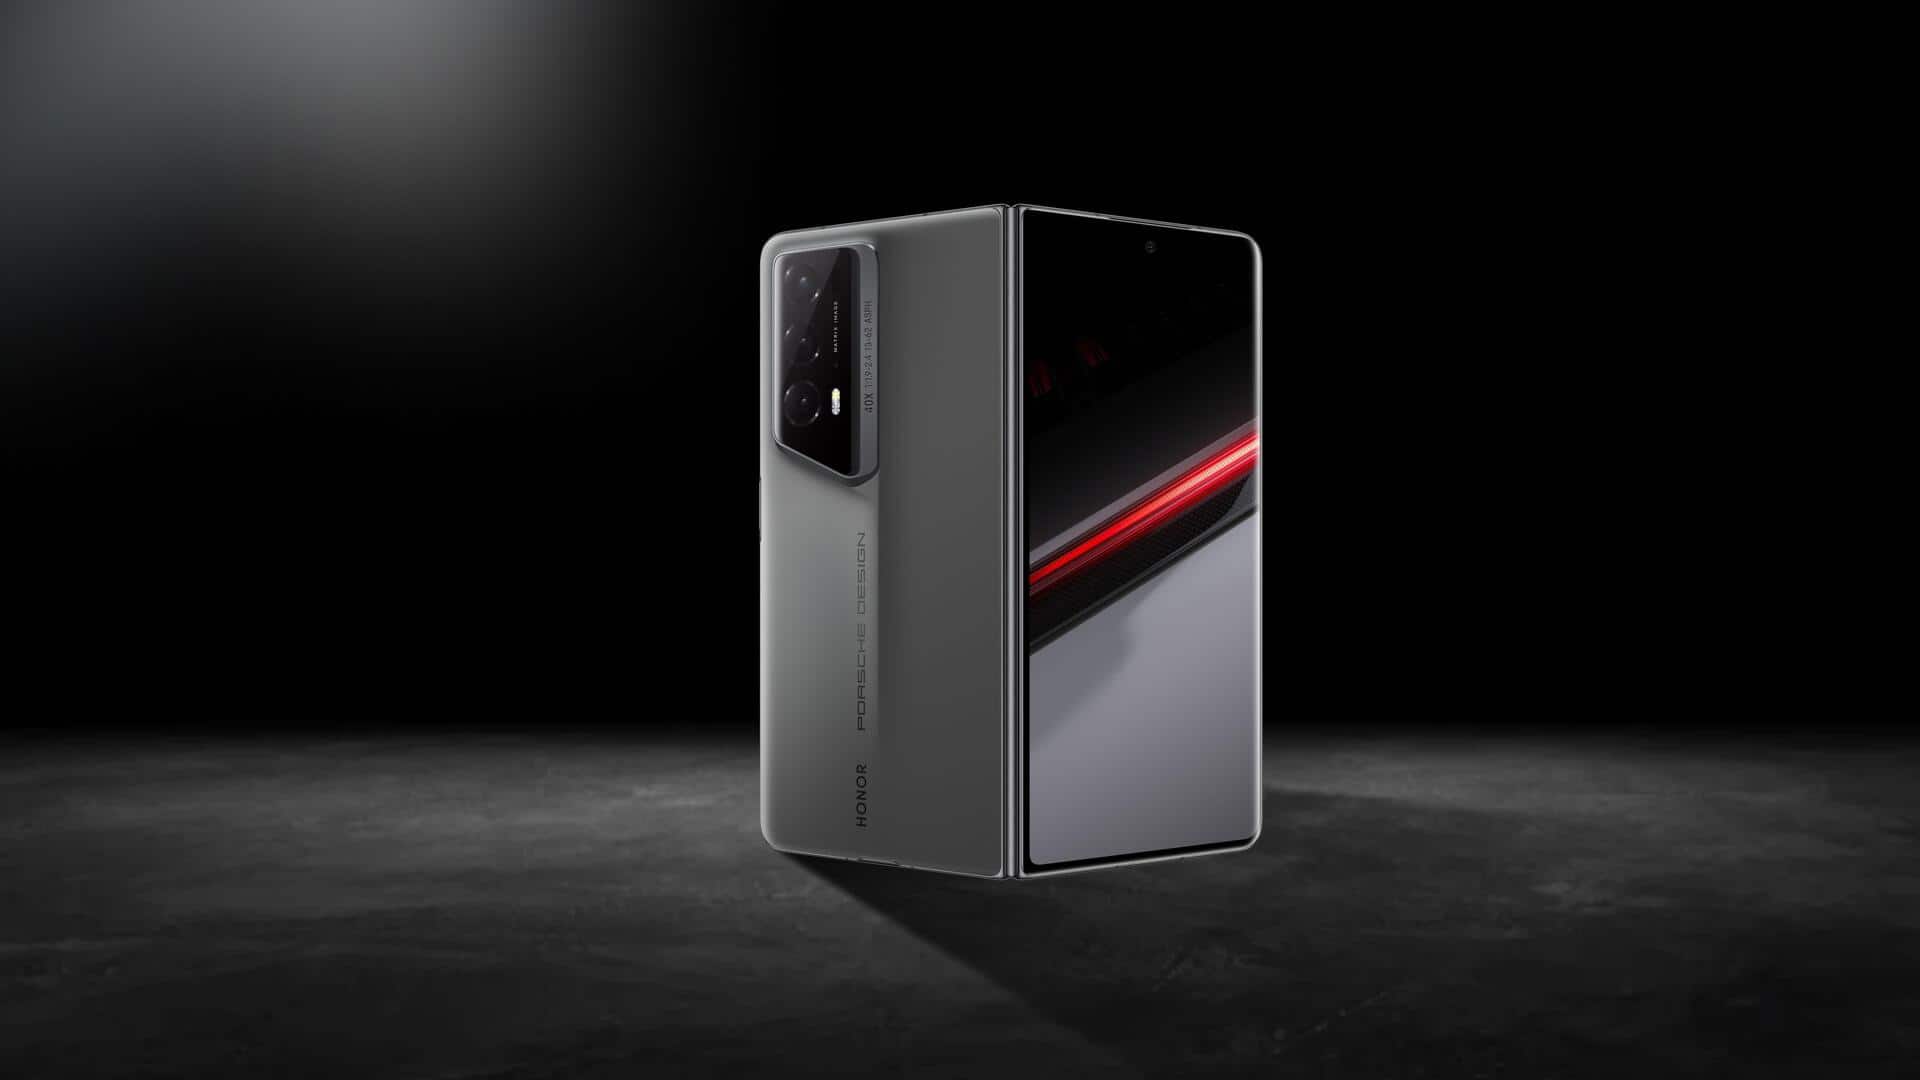 World's thinnest foldable phone goes ultra-premium with Porsche Design makeover